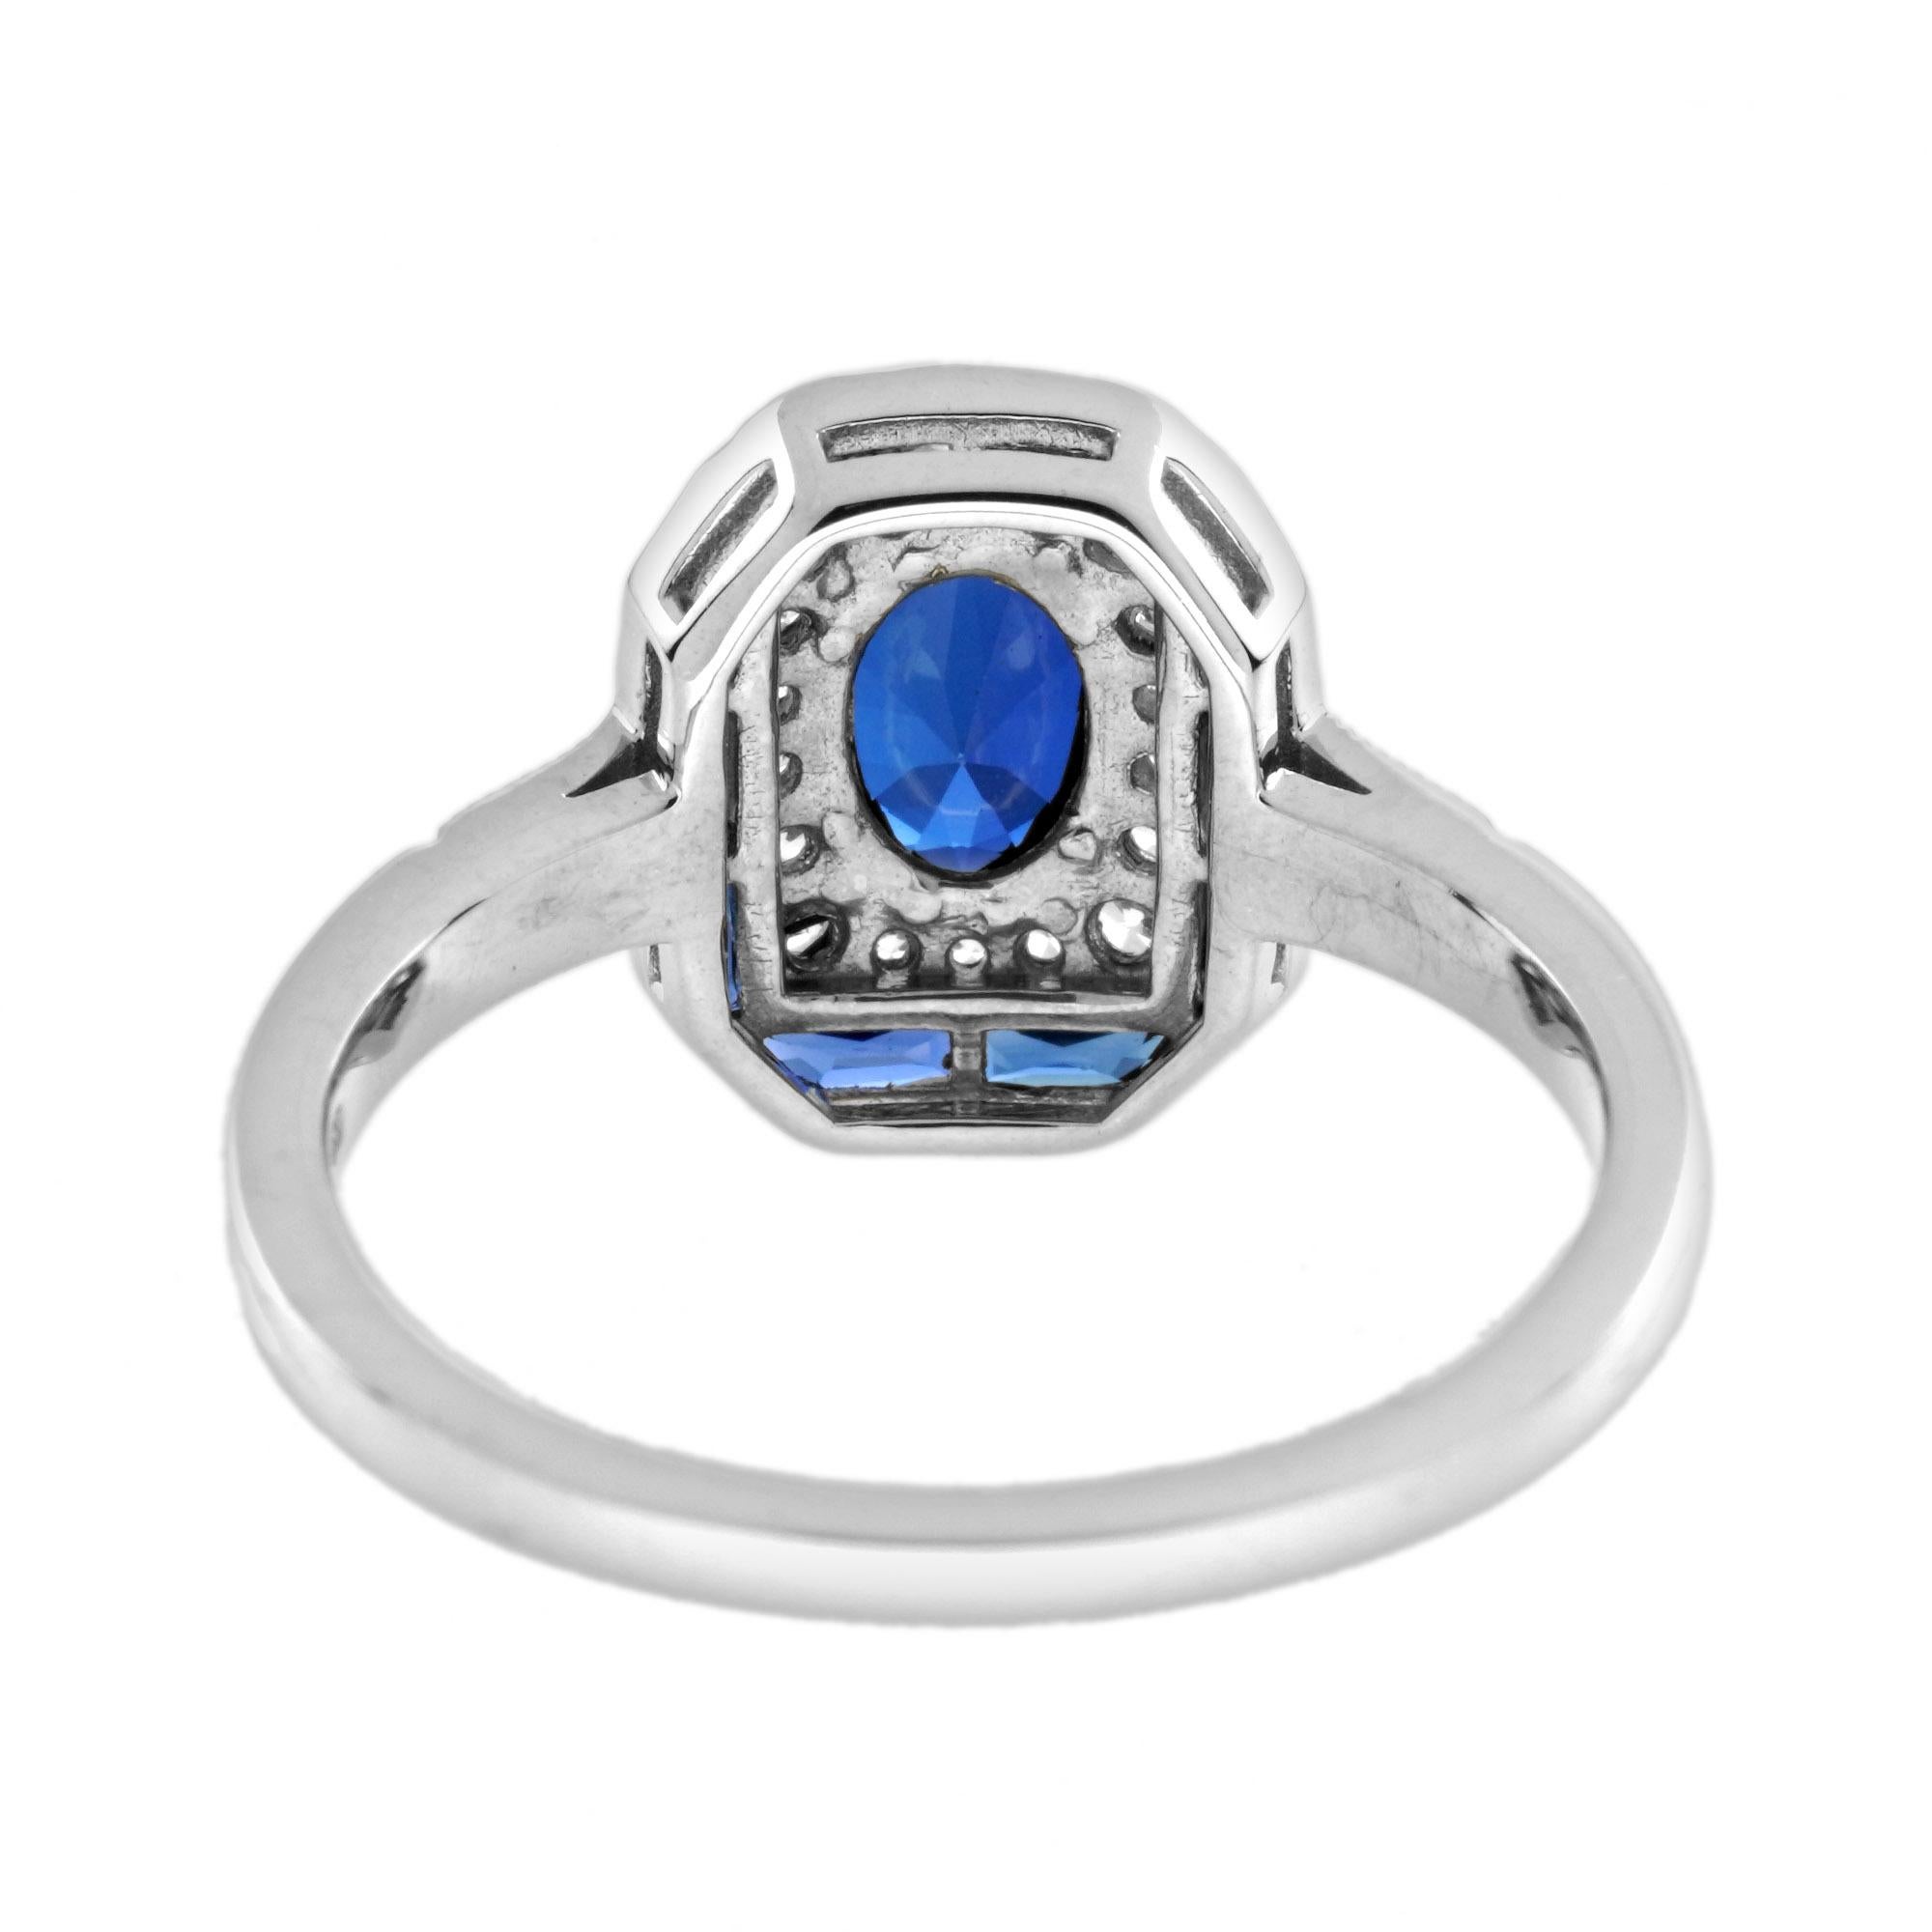 For Sale:  Oval Blue Sapphire and Diamond Art Deco Style Engagement Ring in 18K White Gold 5